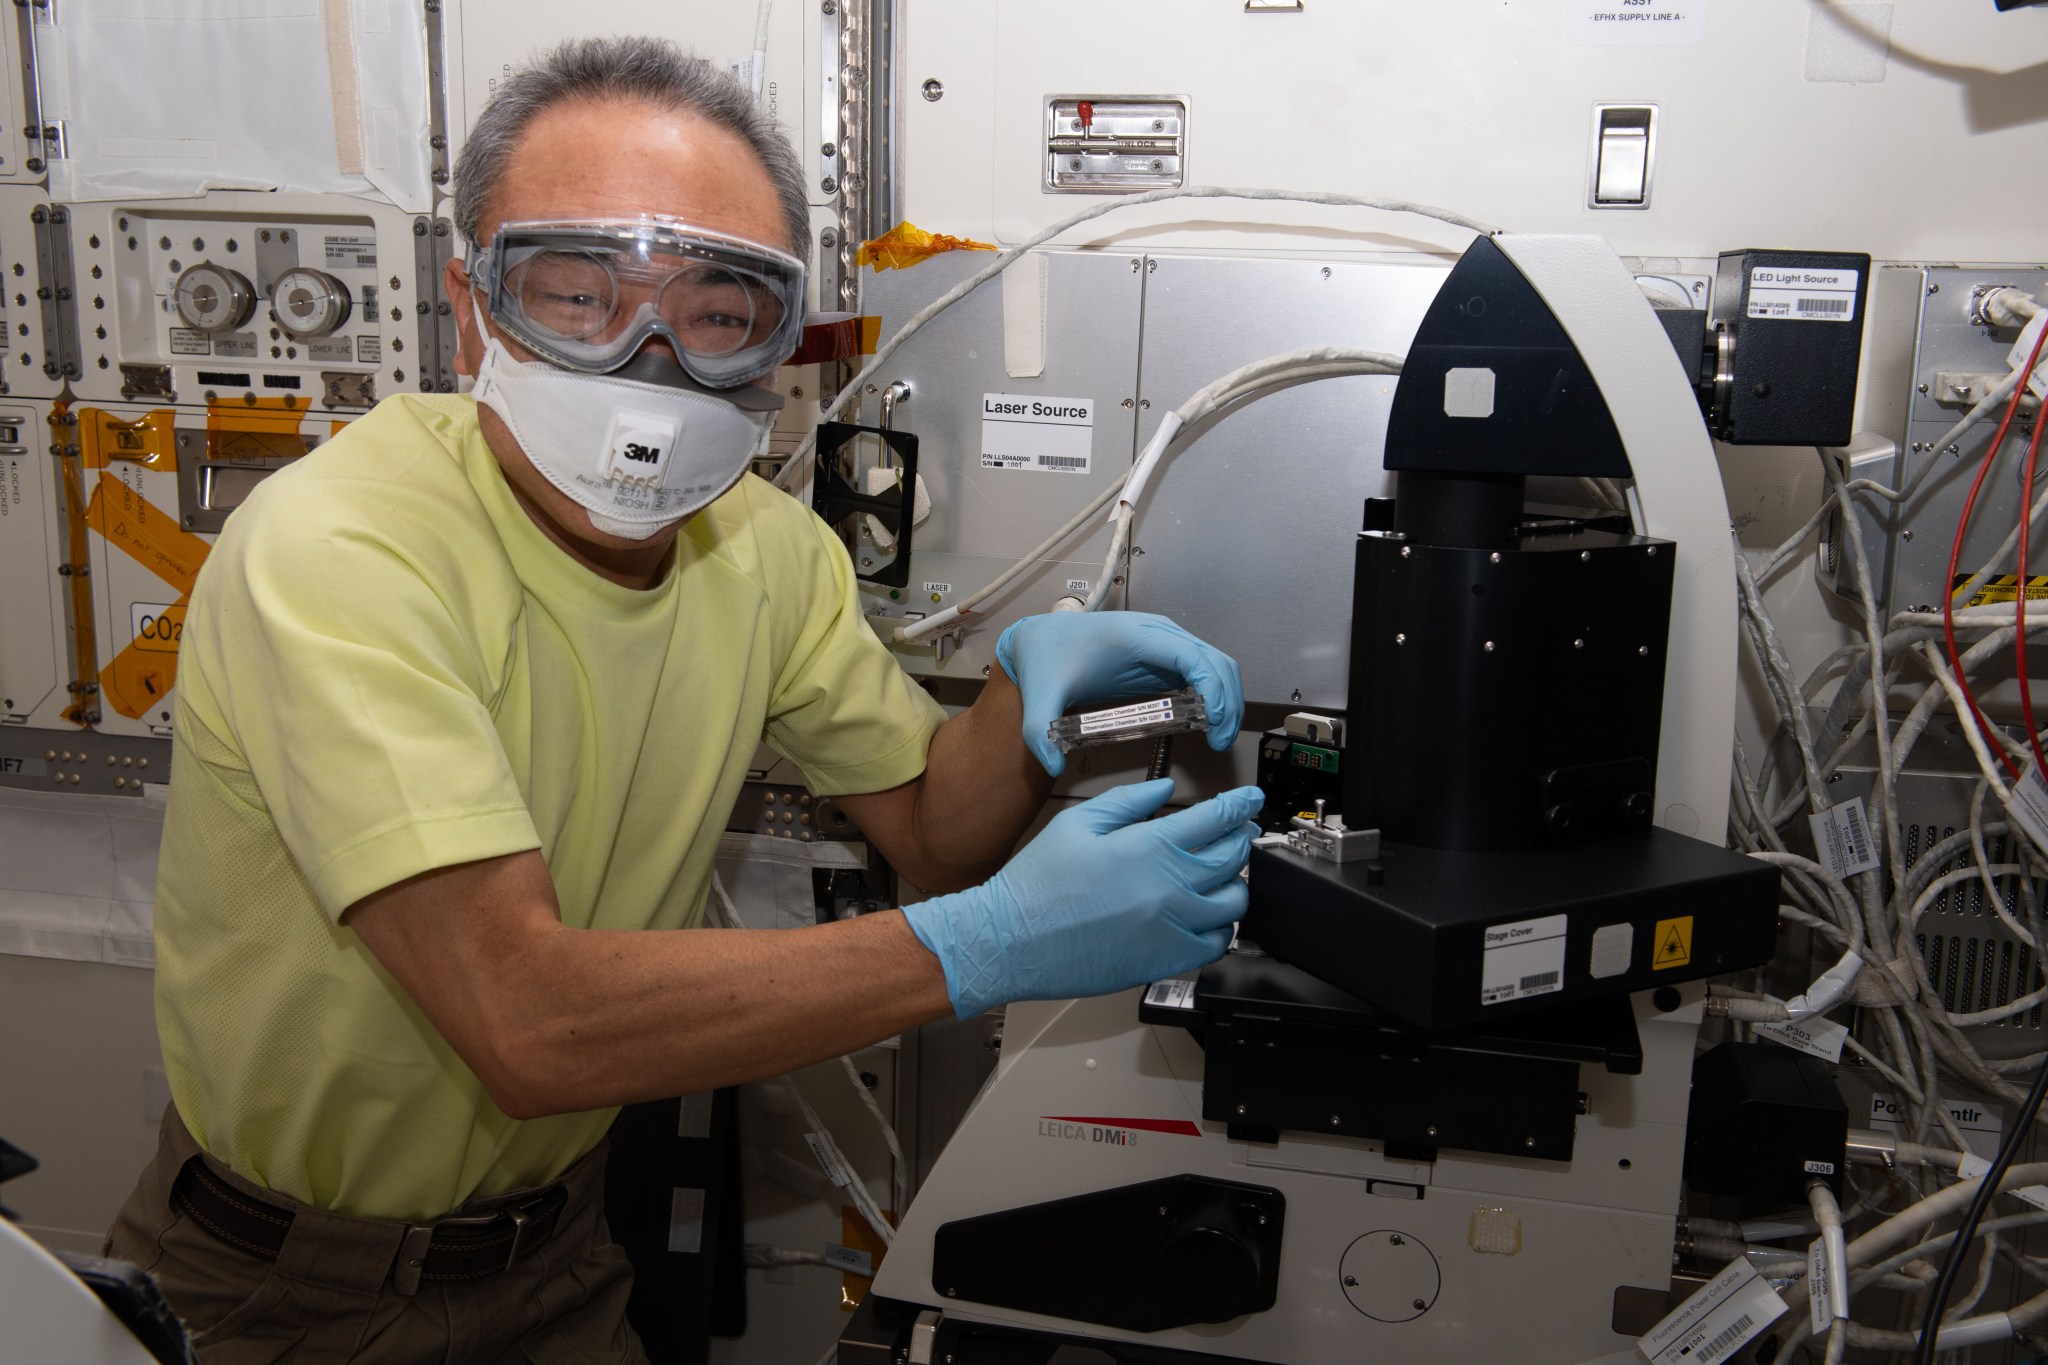 Satoshi Furukawa is wearing a yellow short-sleeved shirt, a mask, googles, and blue gloves as he works with a black microscope on a workbench.